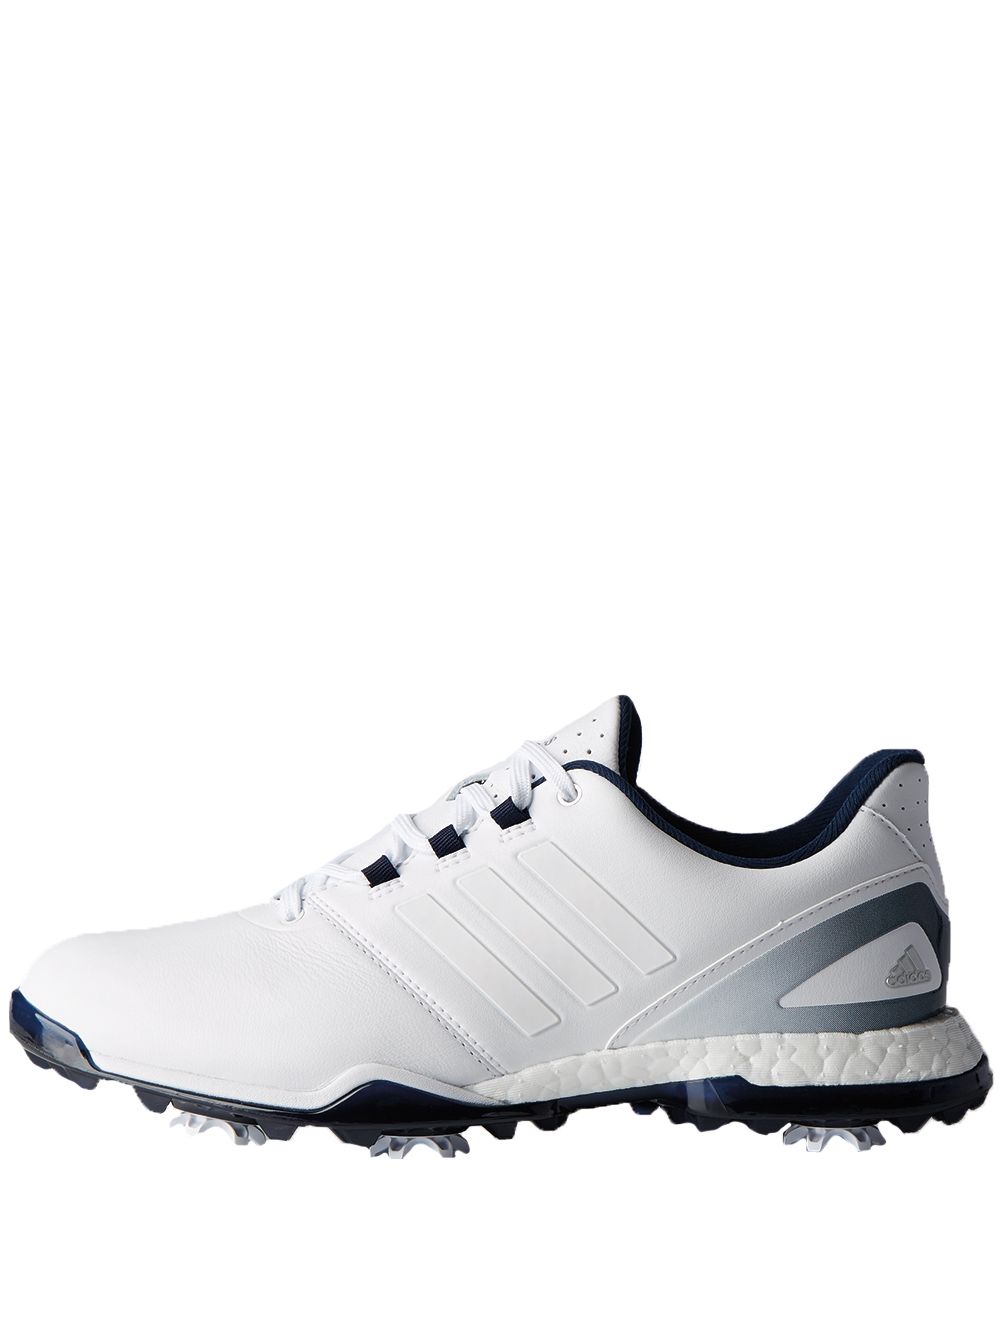 Adidas Womens Adipower Boost Shoes Navy